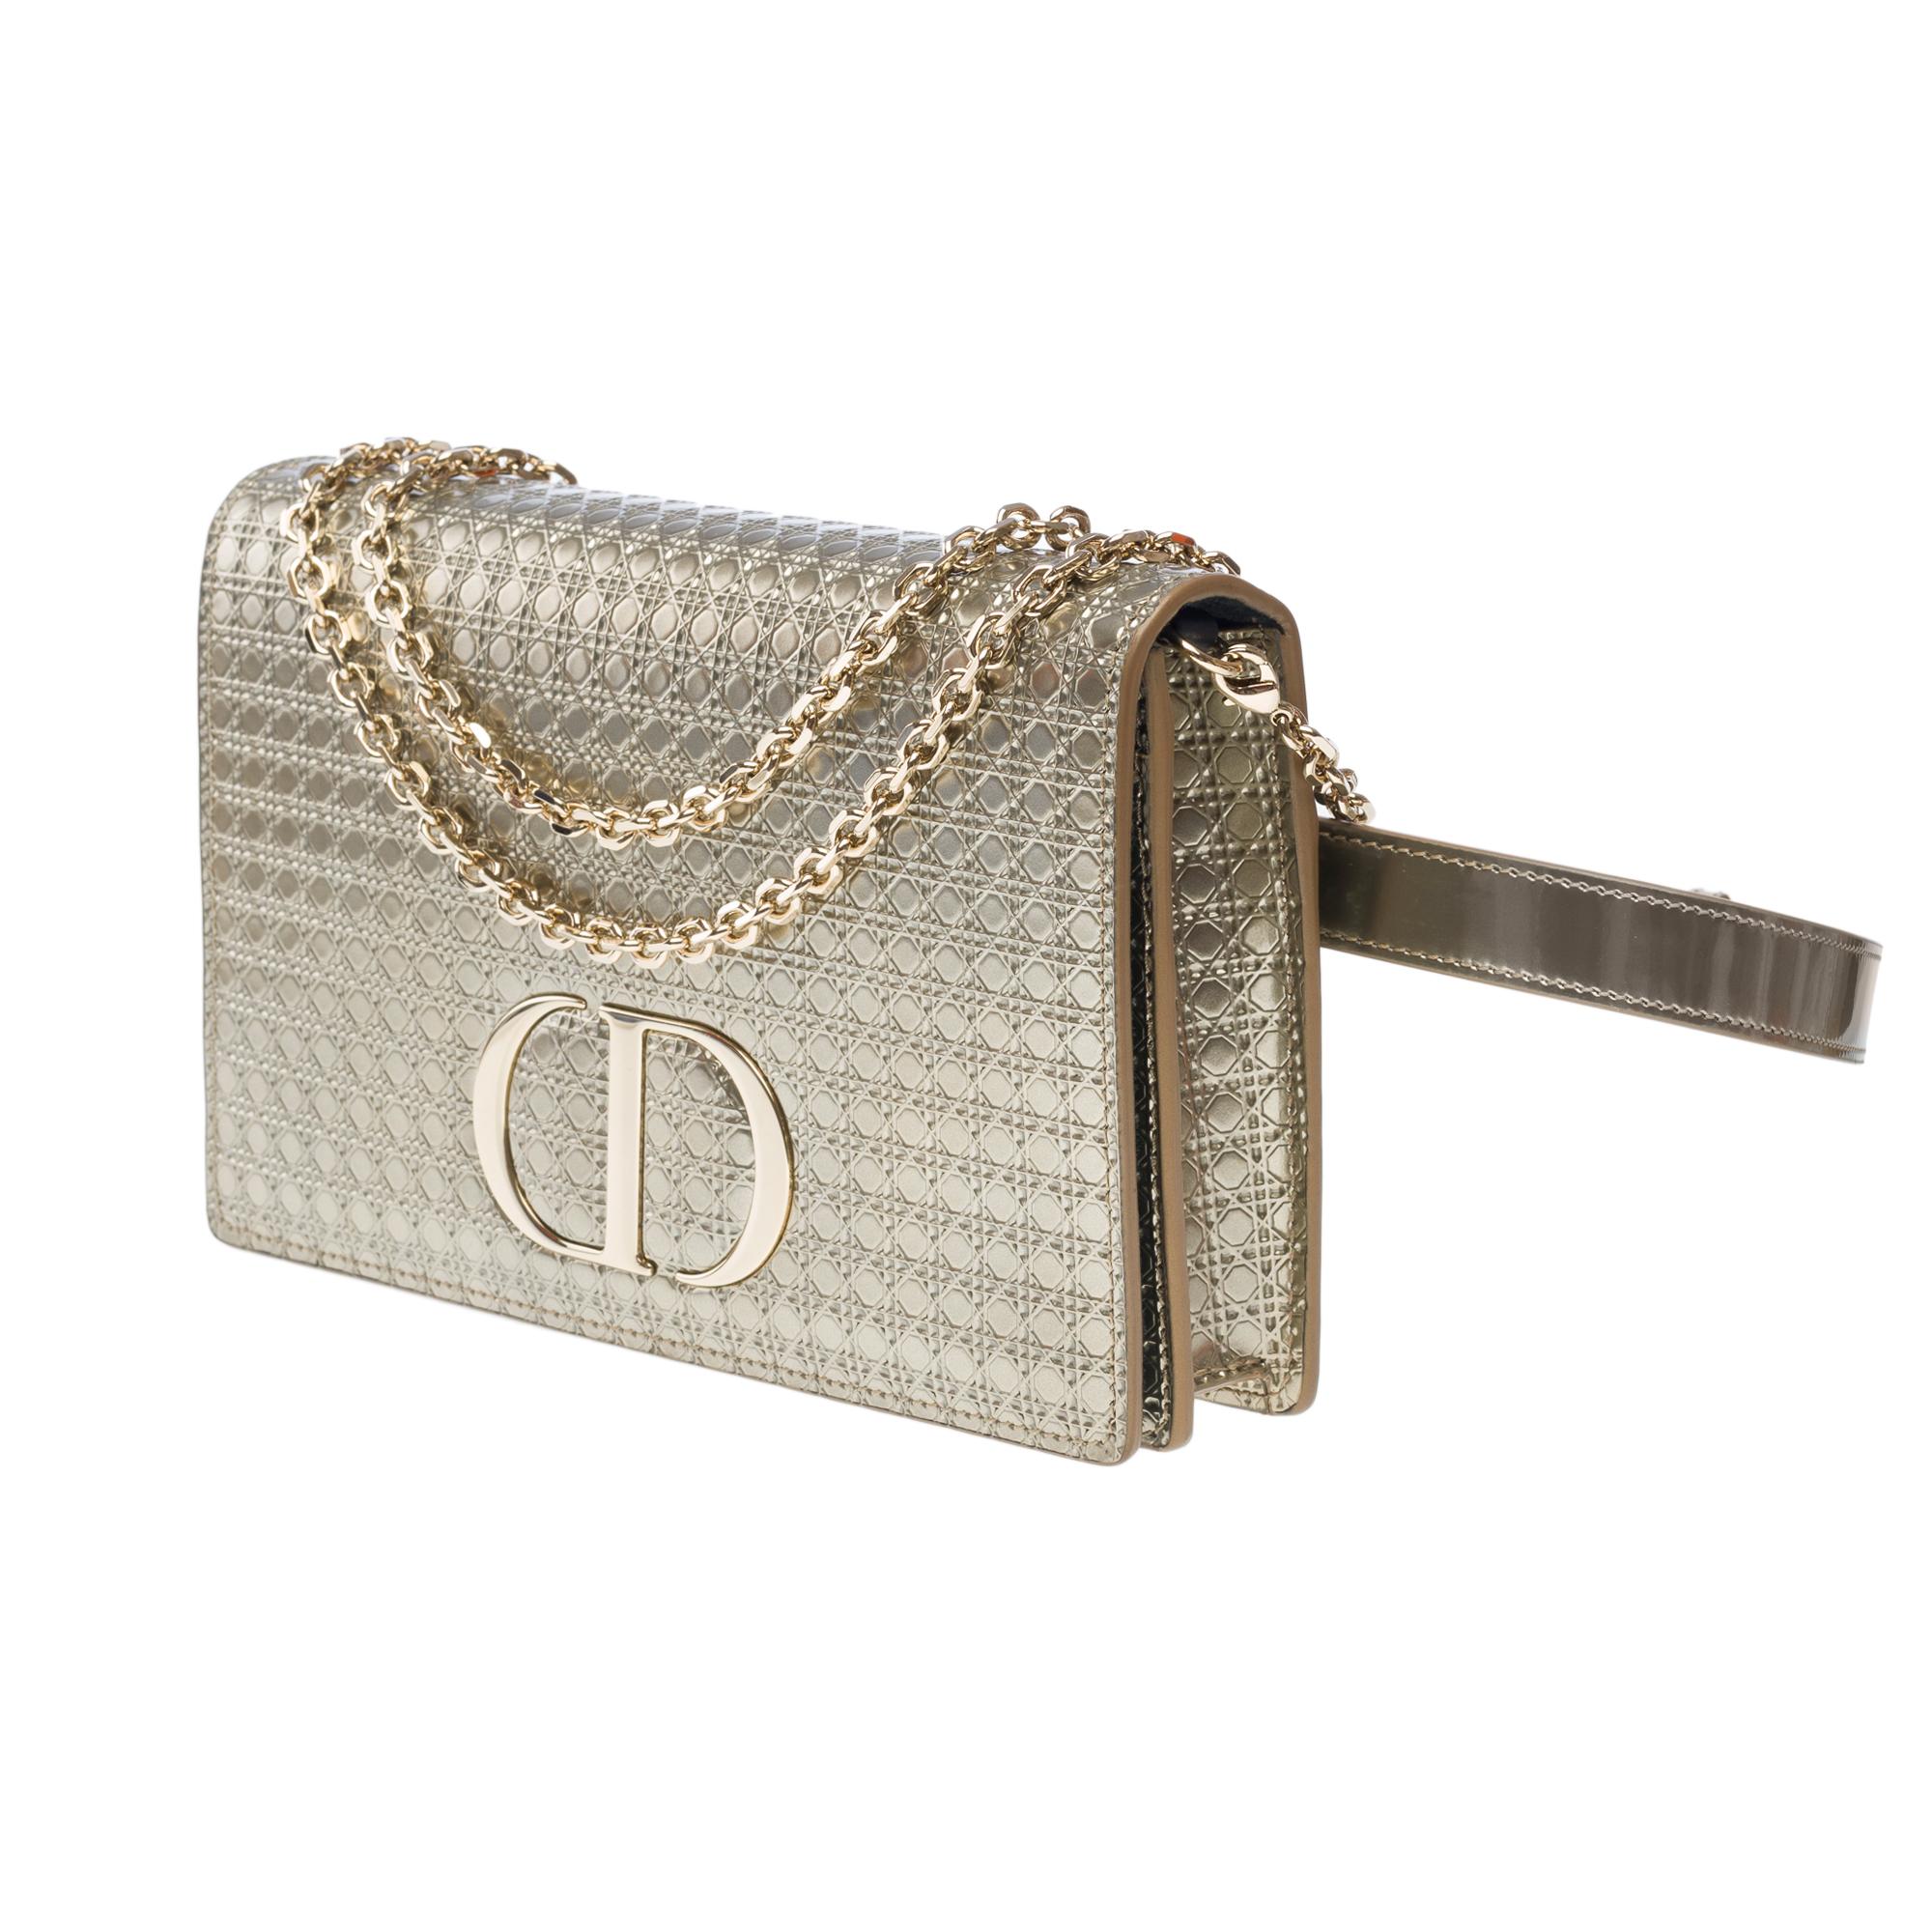 Christian Dior shoulder&belt bag 2 in 1 30 Montaigne in silver leather For Sale 2